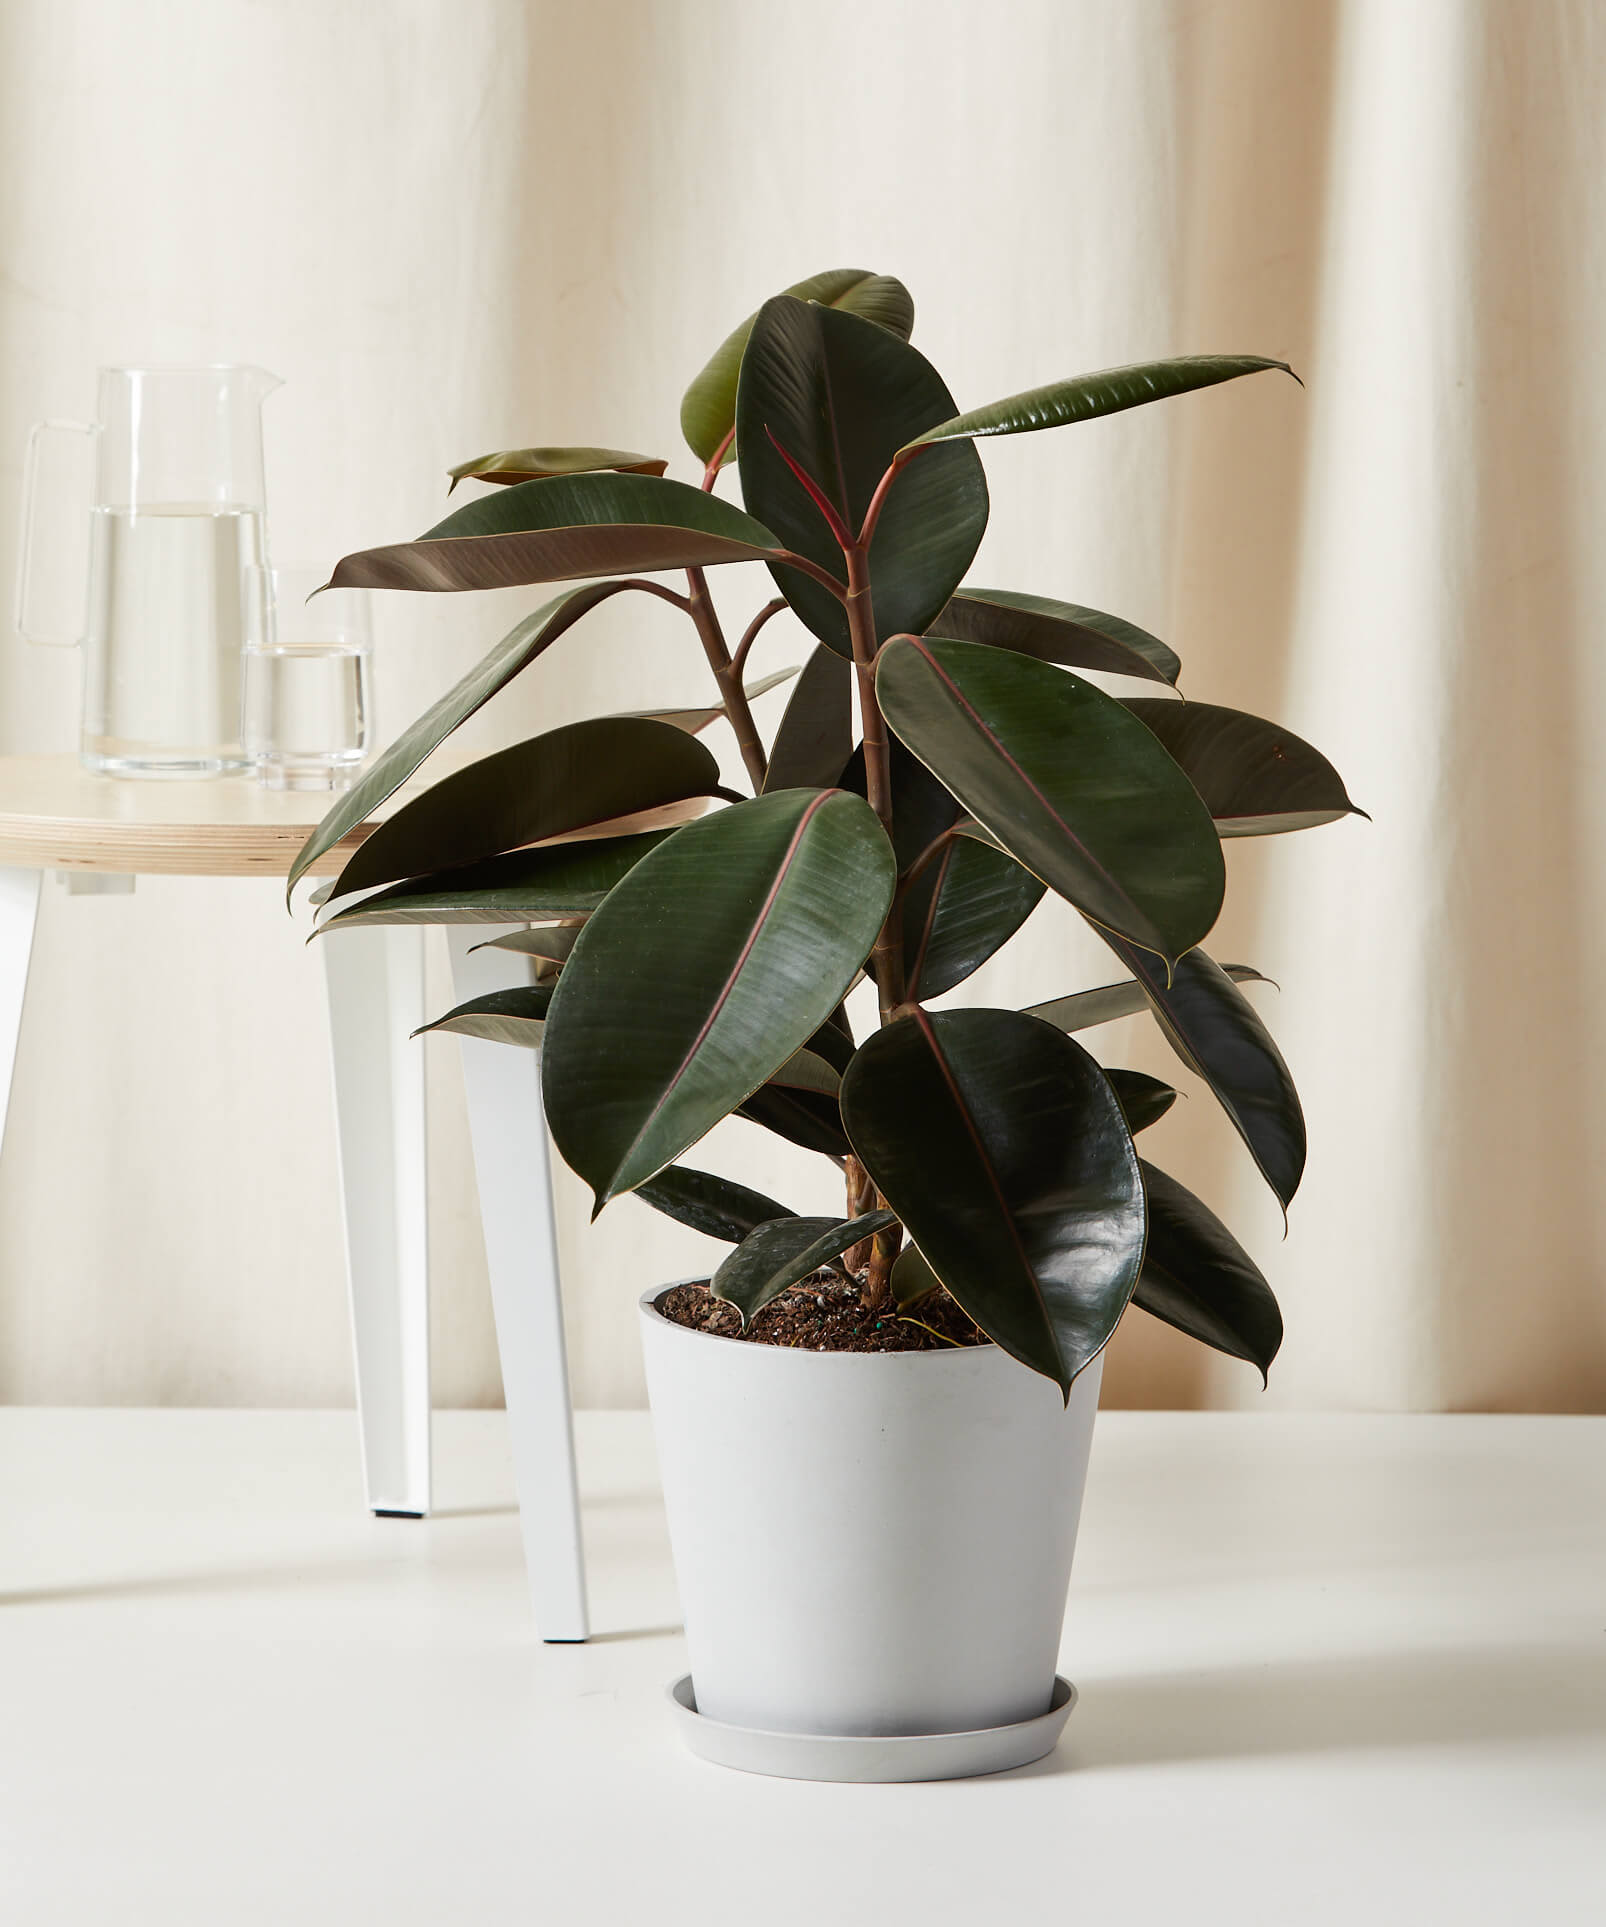 How to take care of Rubber Plant  Plant Care and Tips - JOMO Studio